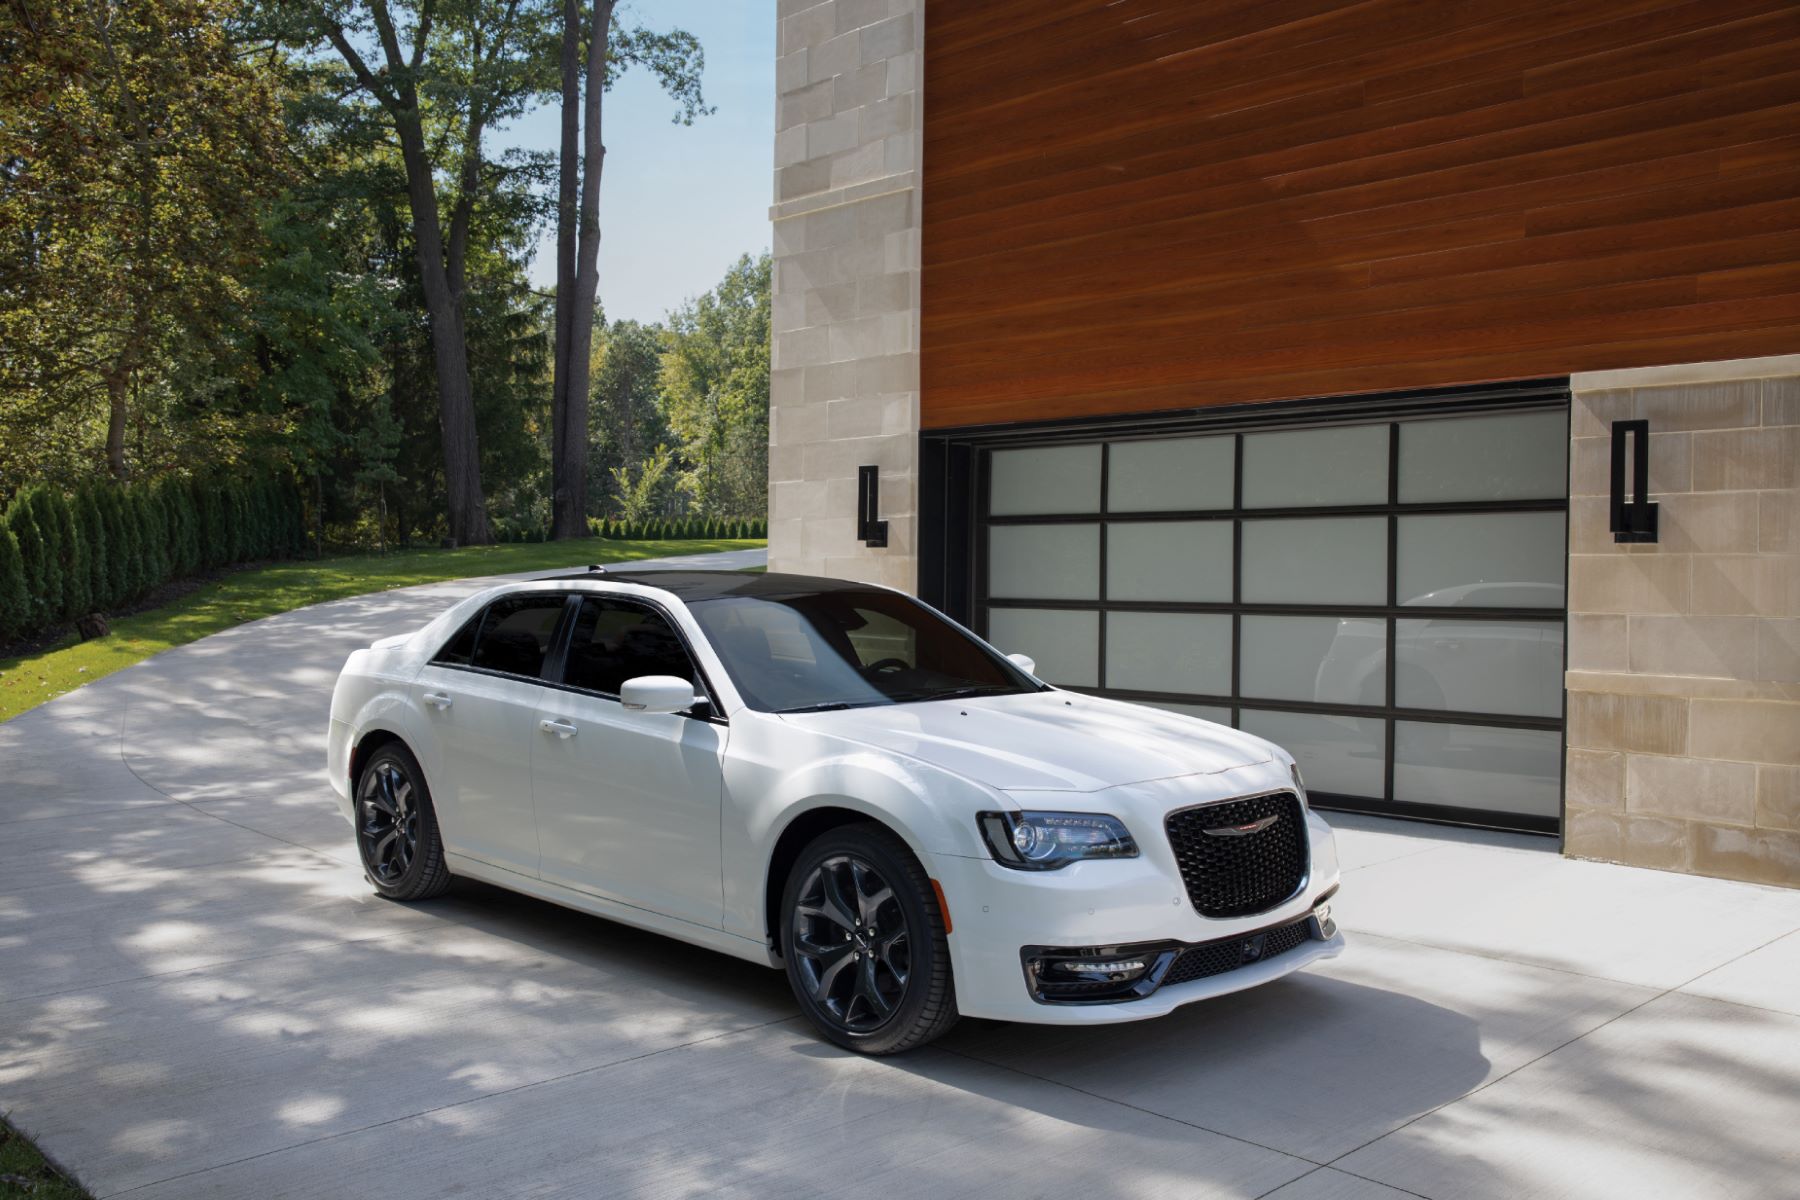 The Incredible Value Of The 2021 Chrysler 300S